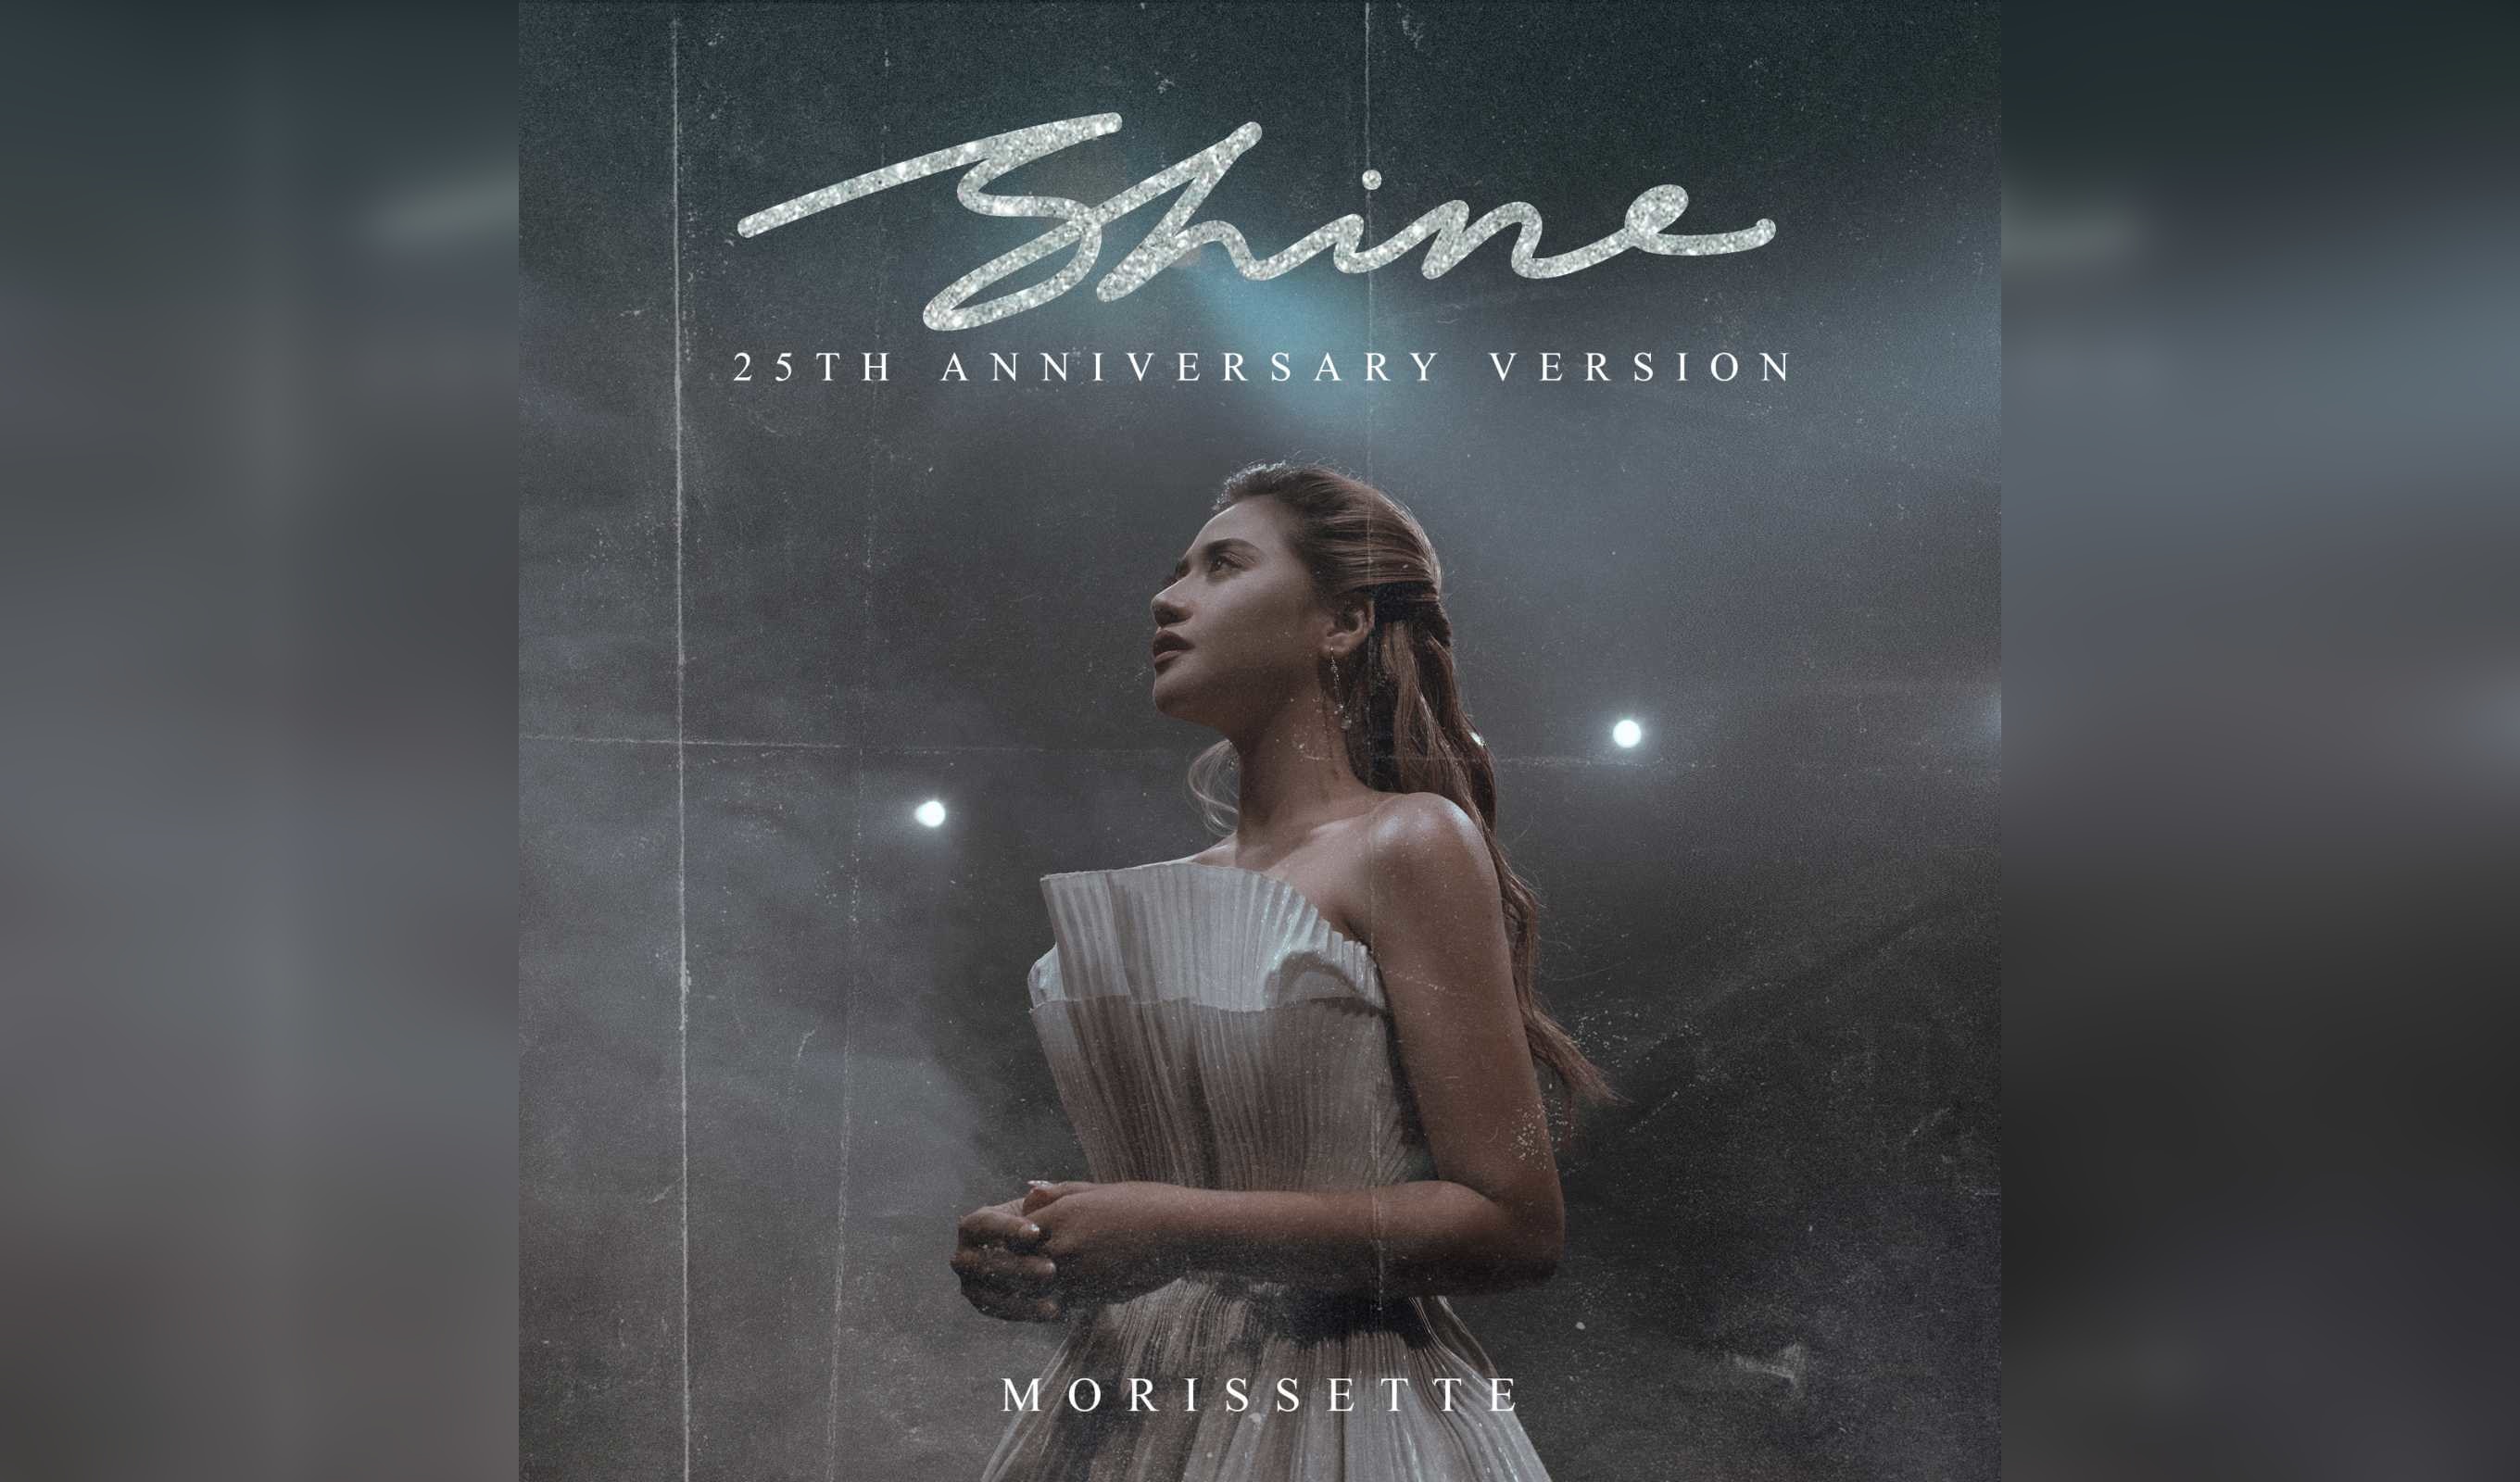 Morissette reimagines "Shine" to celebrate the song's 25th year